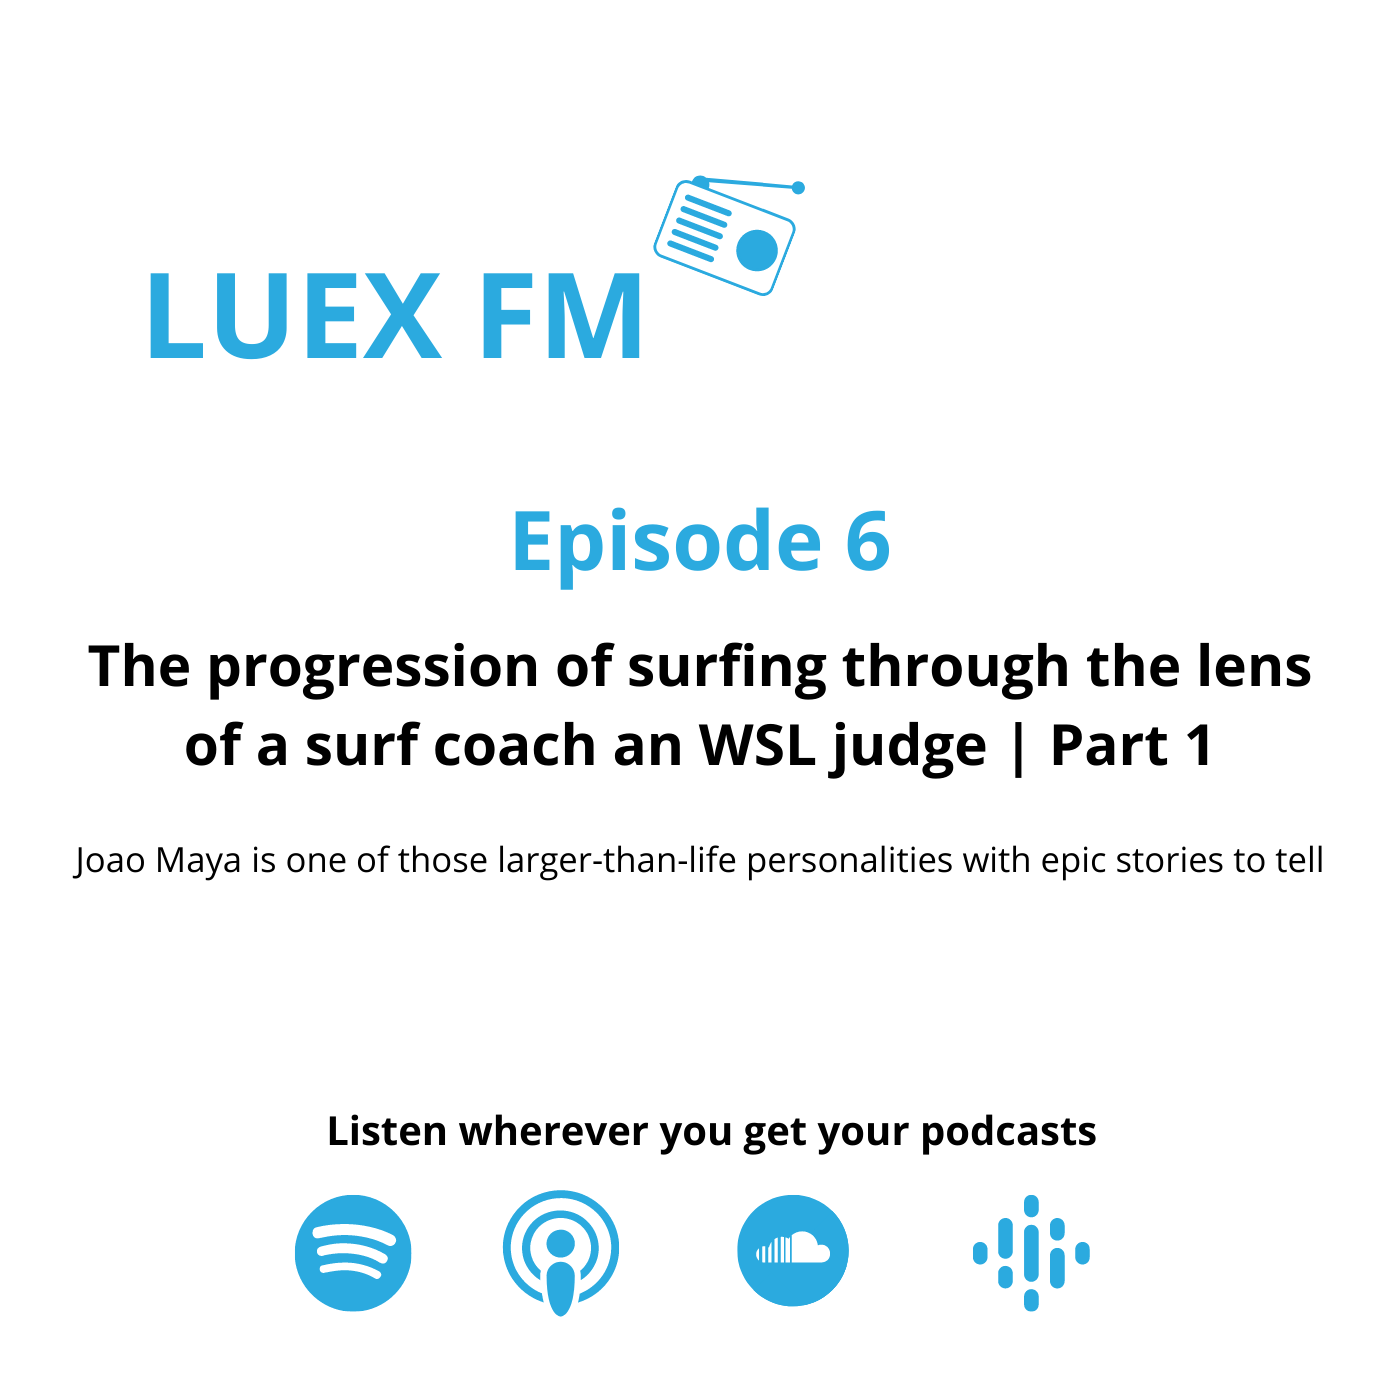 Episode 6 | The progression of surfing through the lens of a surf coach and WSL judge - Part 1